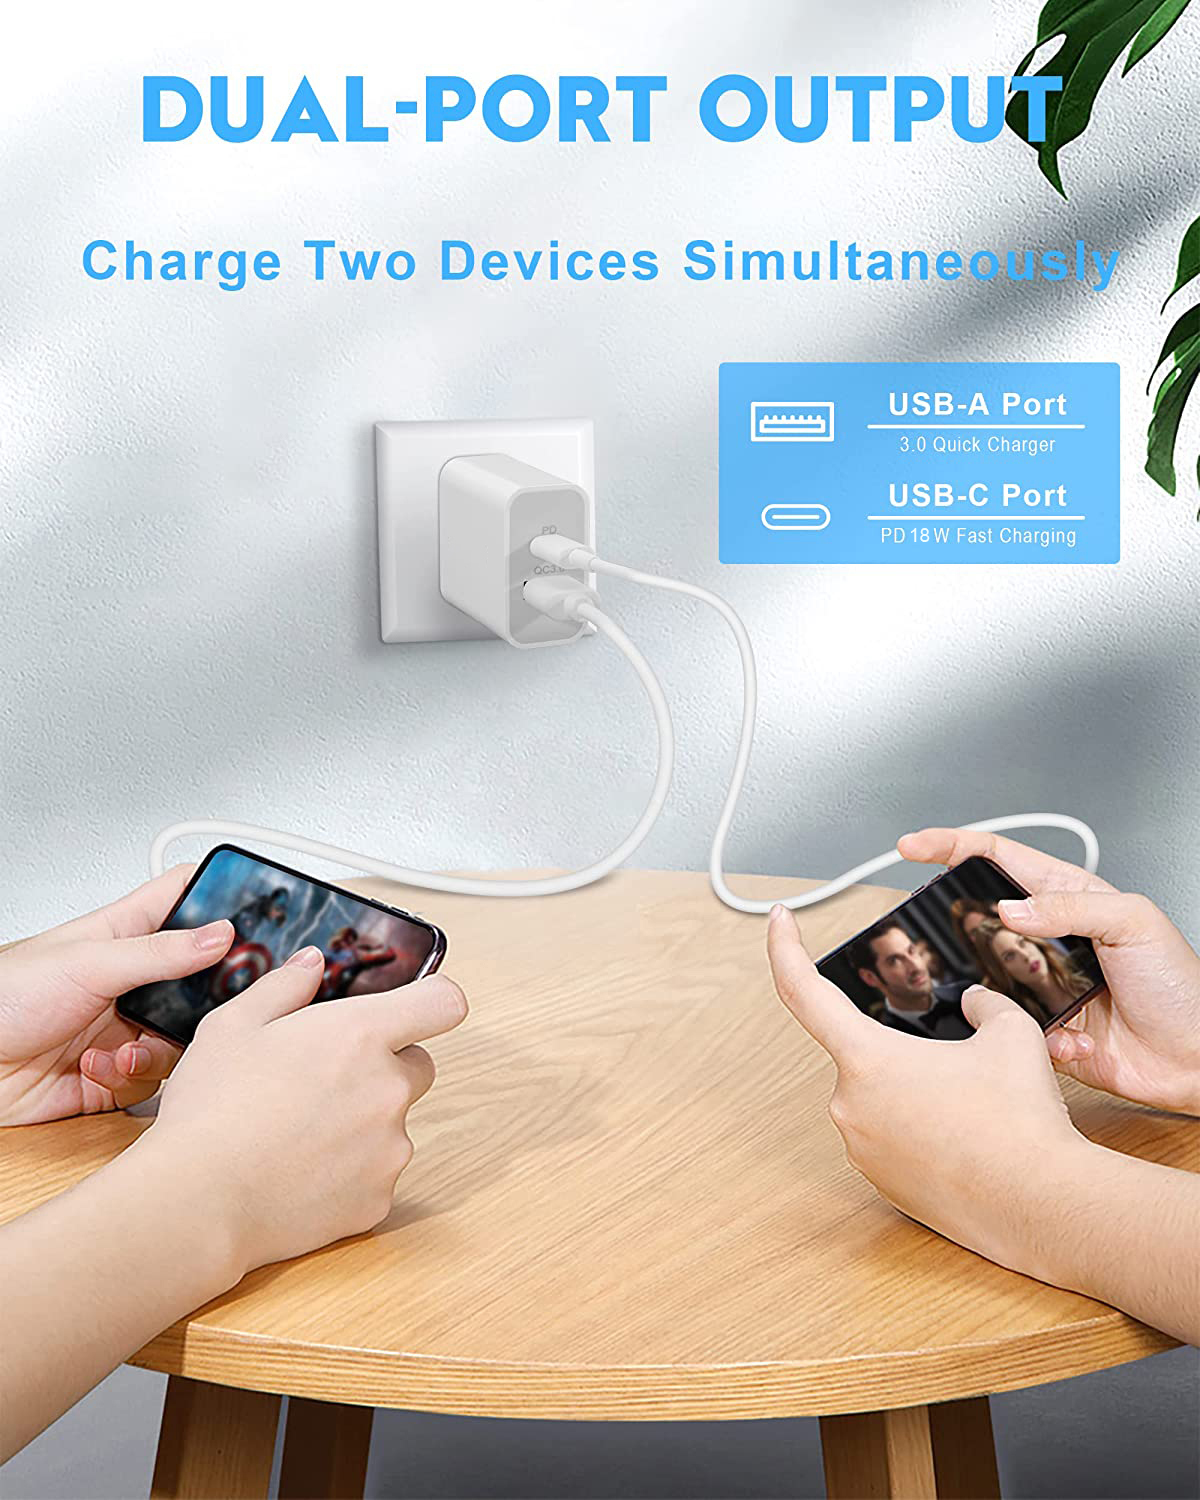 2. LM-18-2216 Dual-Port 18W PD + QC 3.0 Charger Bulk Purchase and Corporate purchase from China Union Power inc -Description-